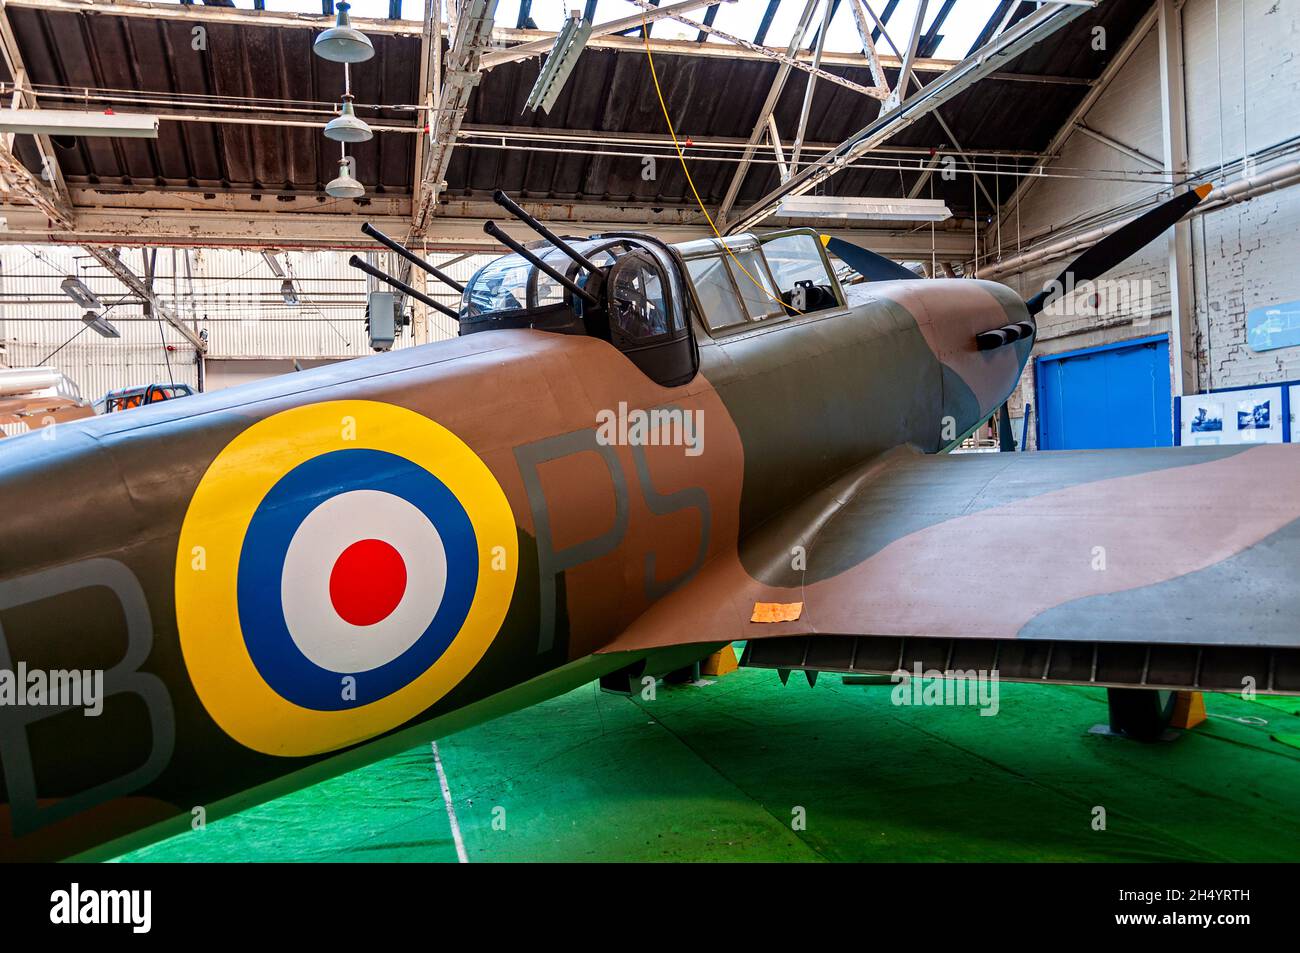 A replica of the Boulton Paul Defiant which was a British interceptor aircraft that served as a turret fighter with the Royal Air Force in WW2 Stock Photo